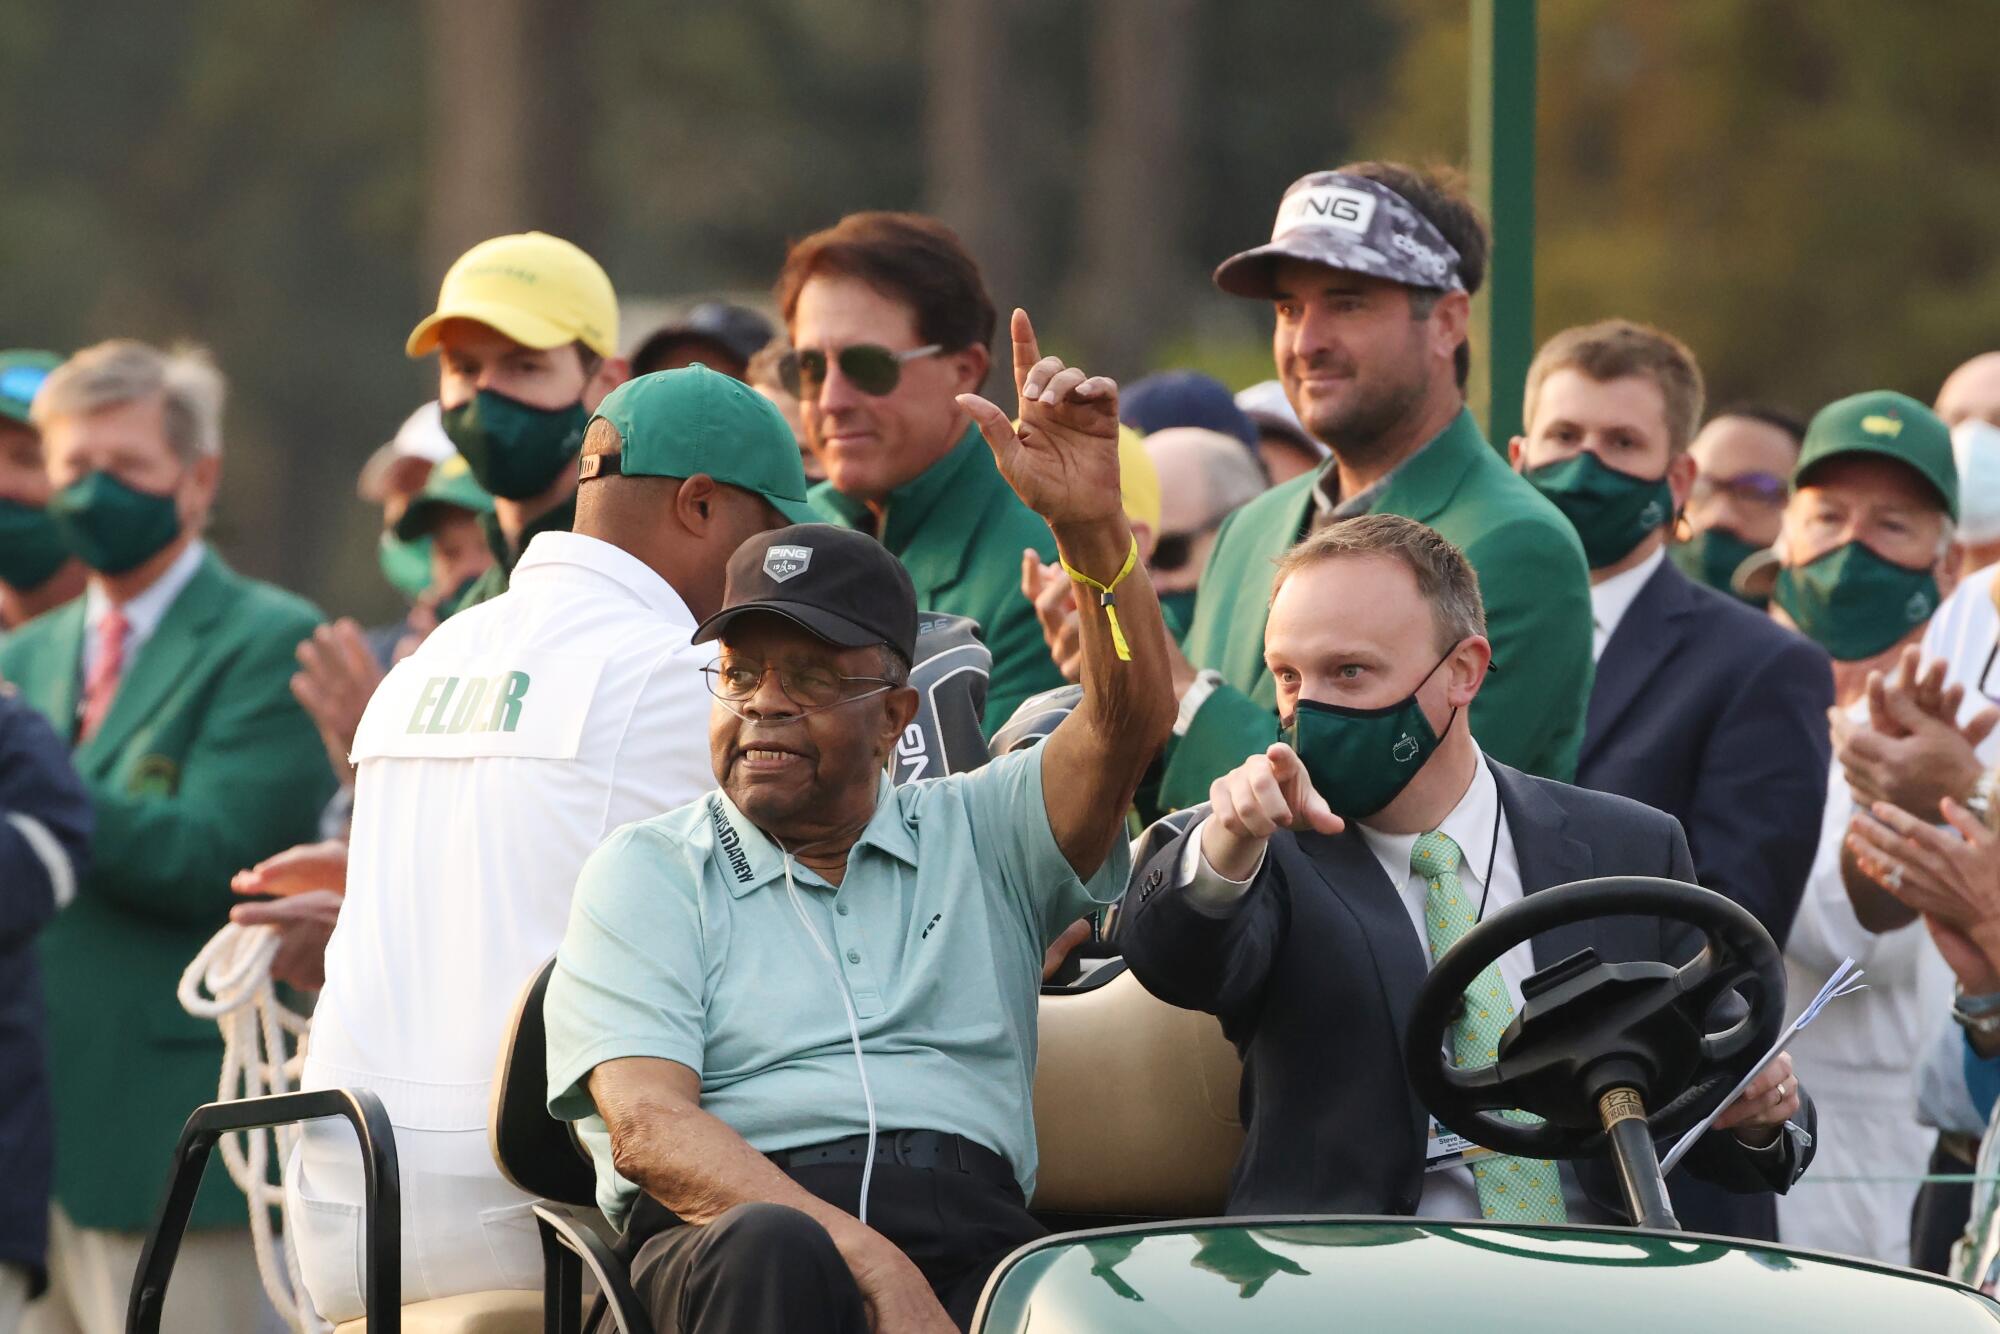 Honorary starter Lee Elder waves as he arrives to the opening ceremony during the first round.